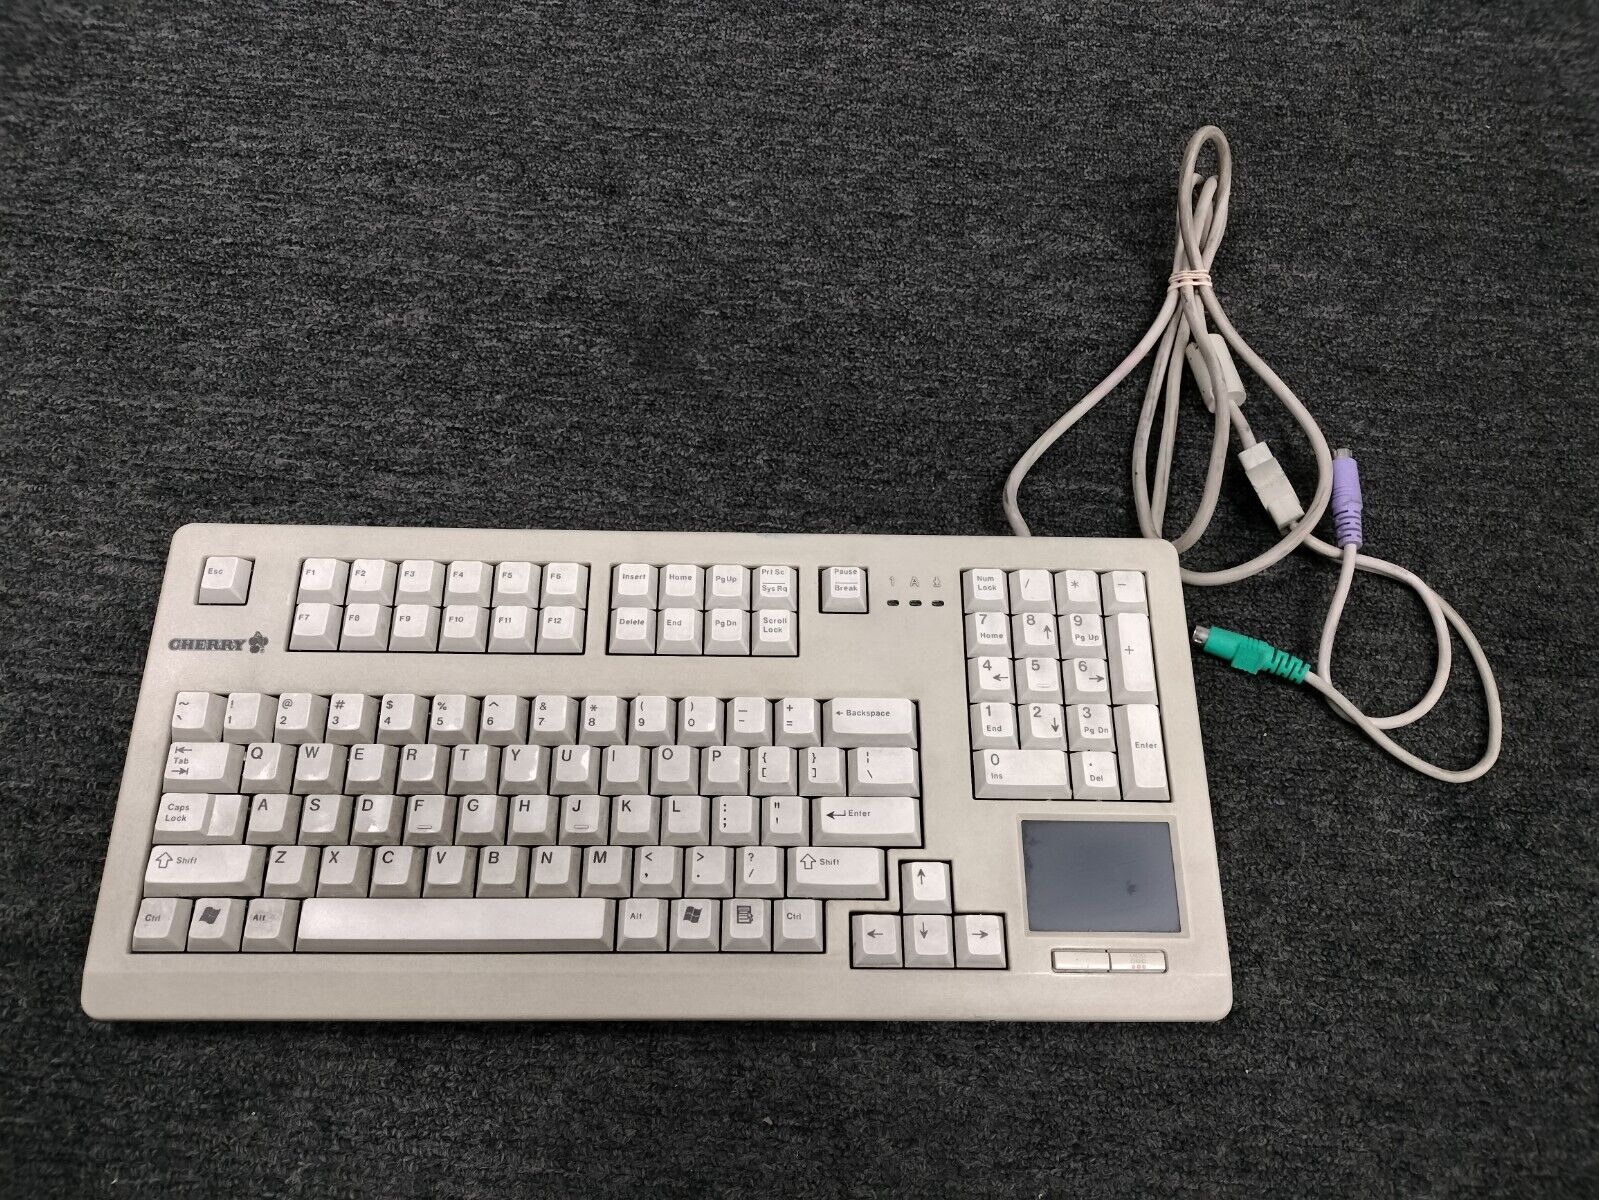 Vintage Cherry PS/2 Keyboard with Integrated Touchpad (MX 11900) (D-91275)